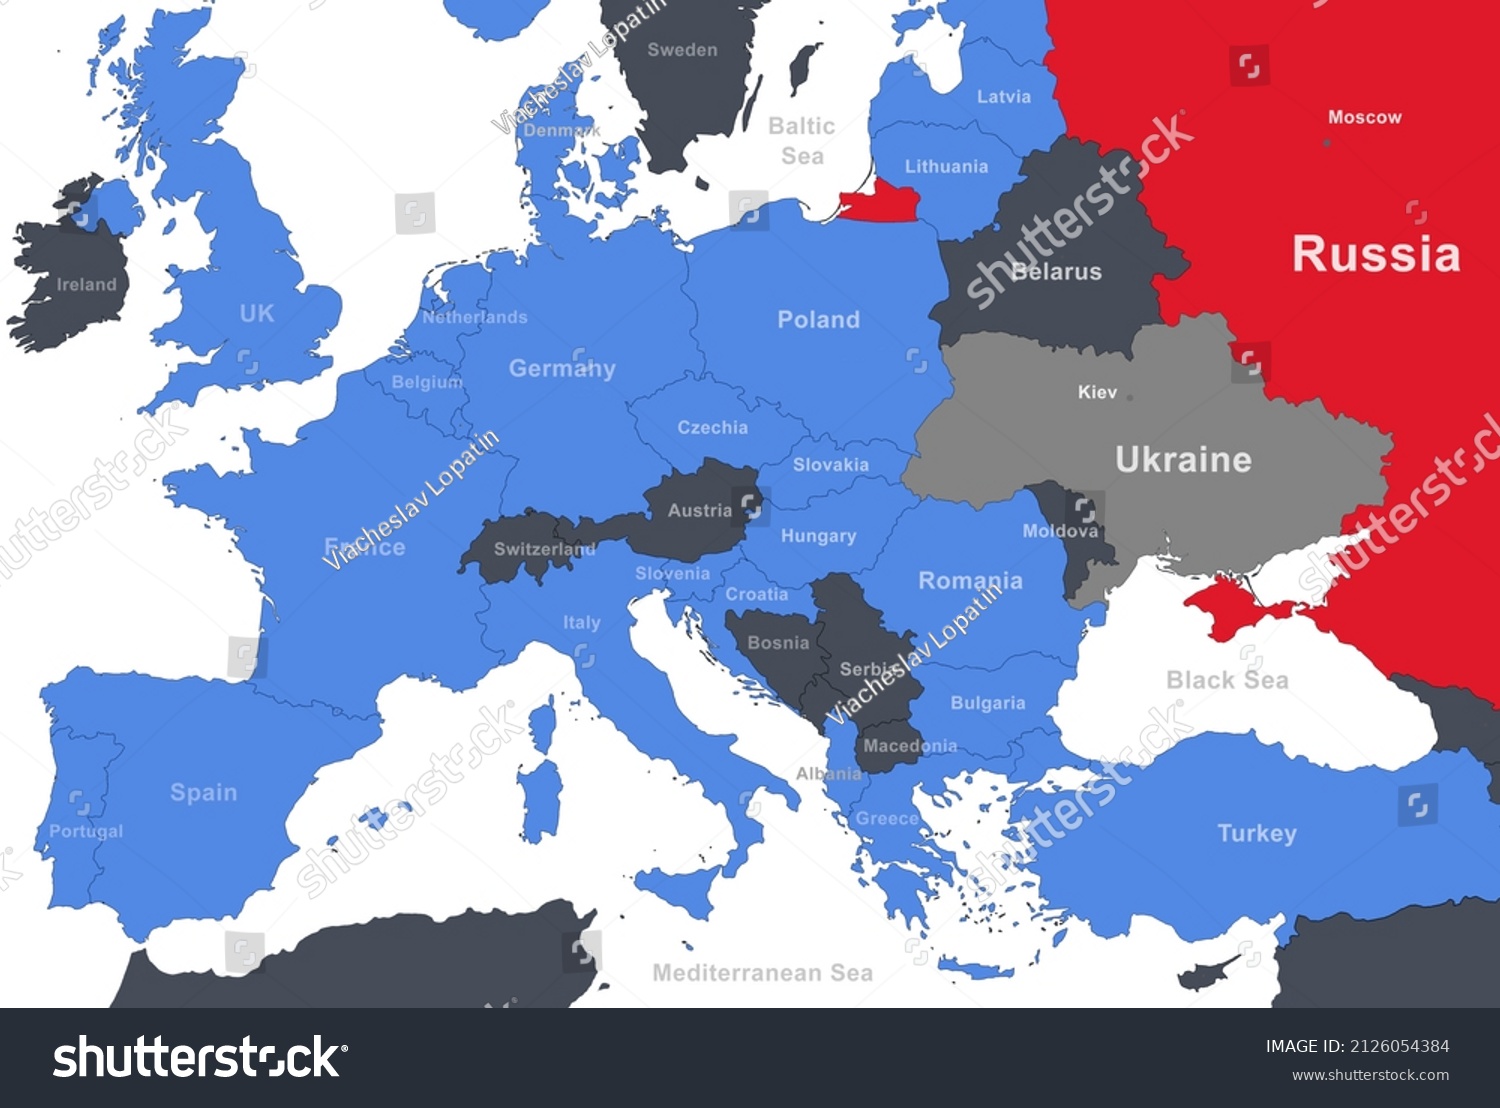 Stock Photo Russia North Atlantic Alliance Nato And Ukraine On Europe Outline Map Russian Border On 2126054384 